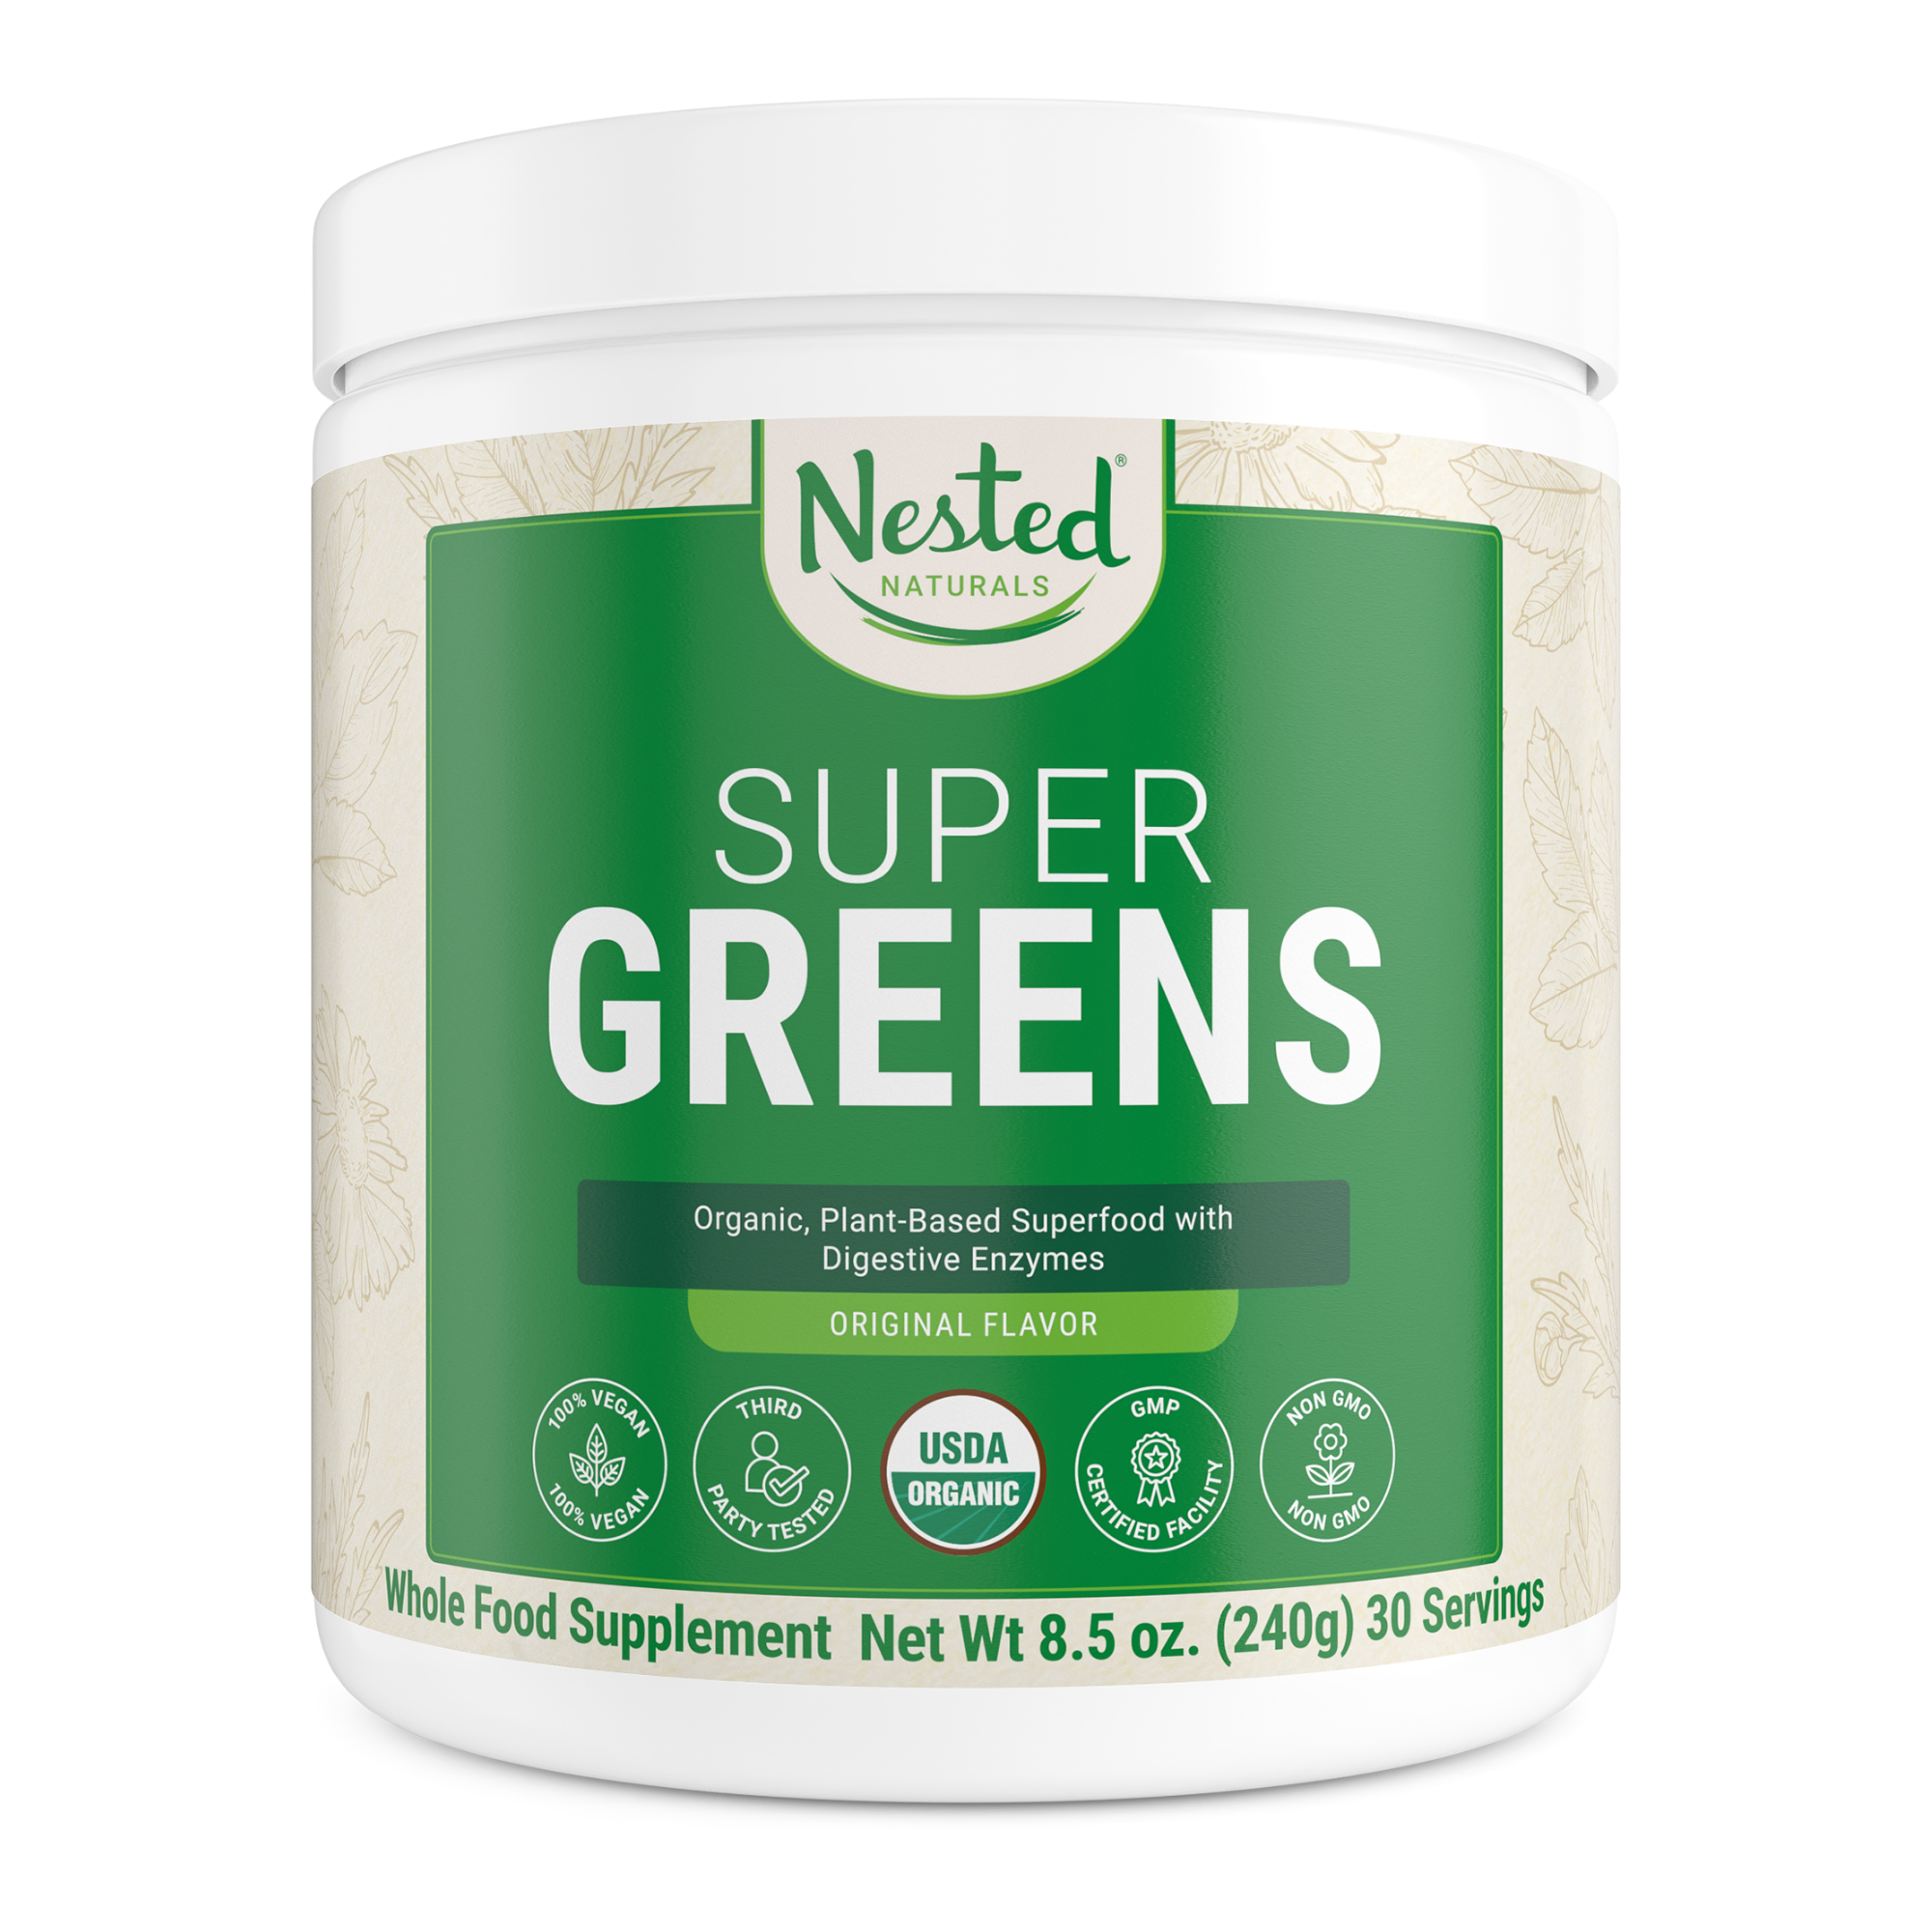 SUPER GREENS Veggie Greens Superfood - 20 Organic Ingredients - Non-GMO No Soy